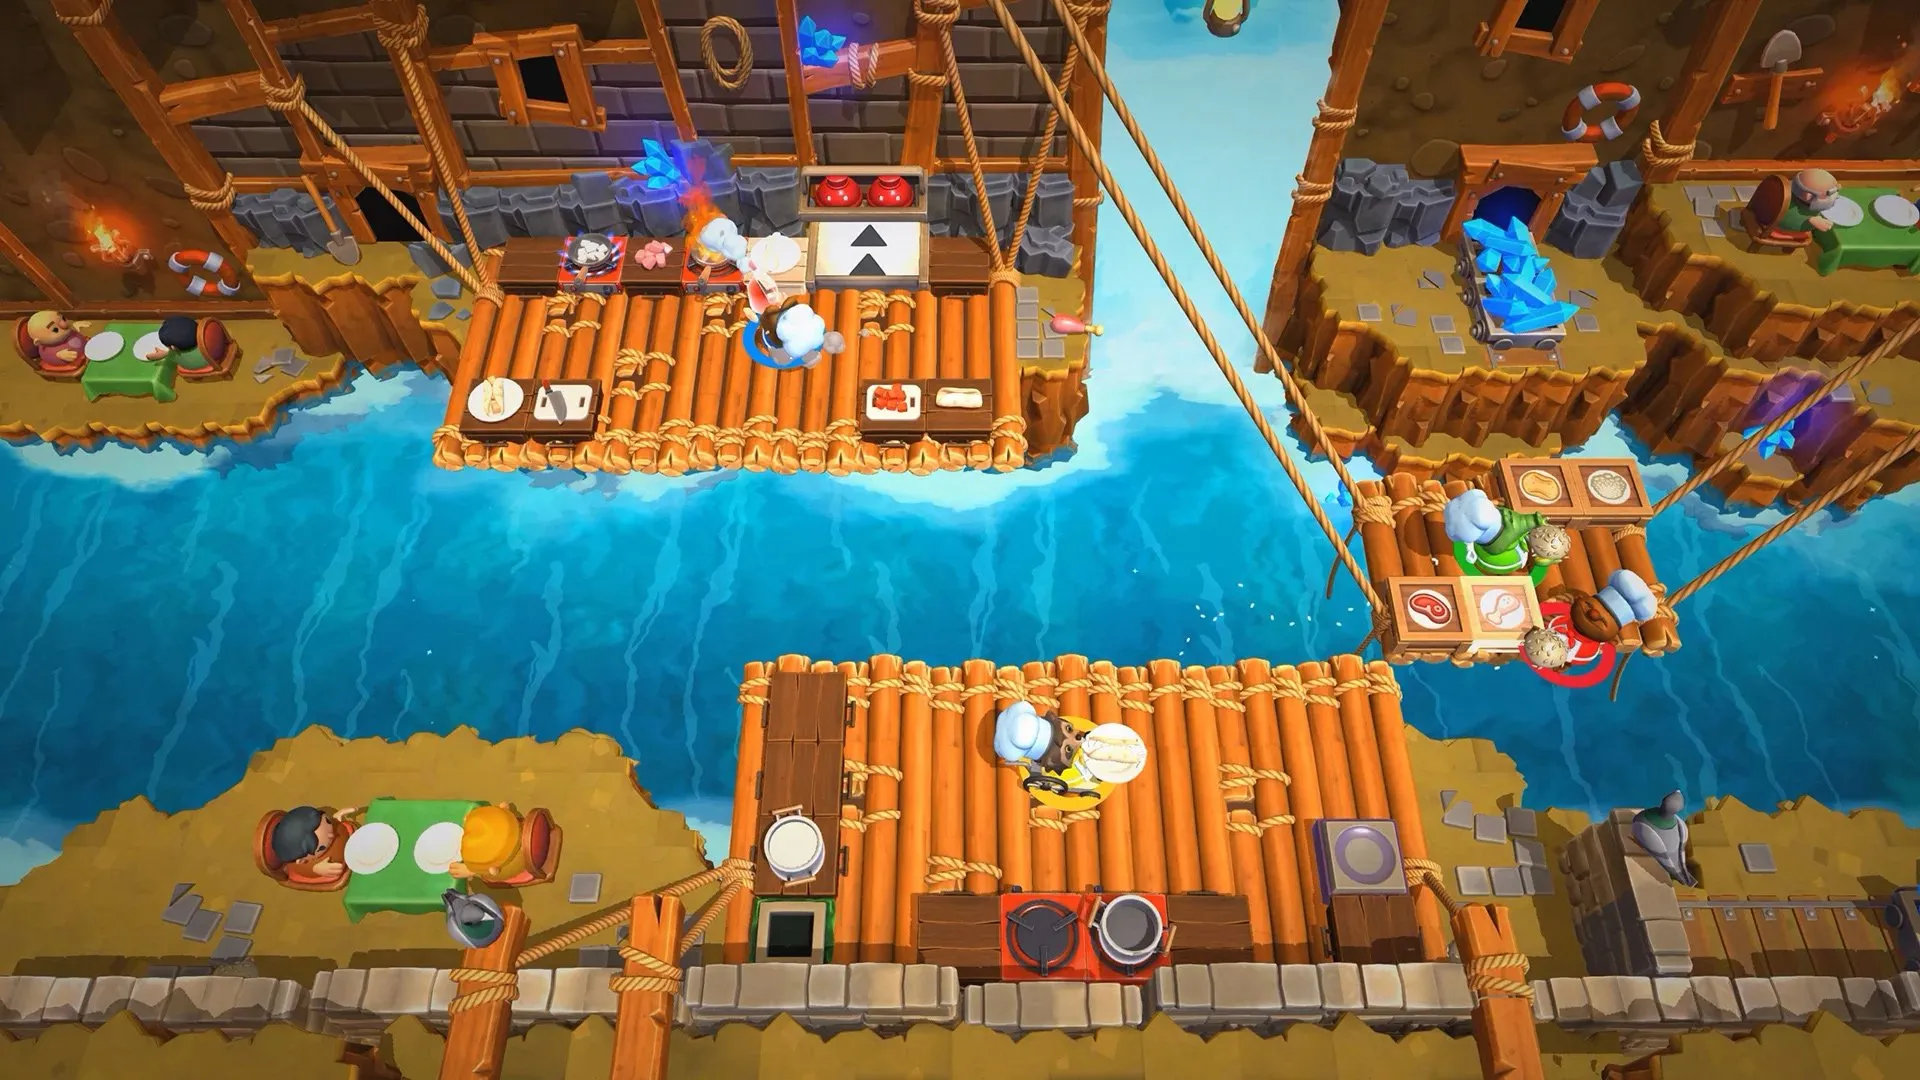 Is Overcooked All You Can Eat Crossplay or Cross Platform? [2023